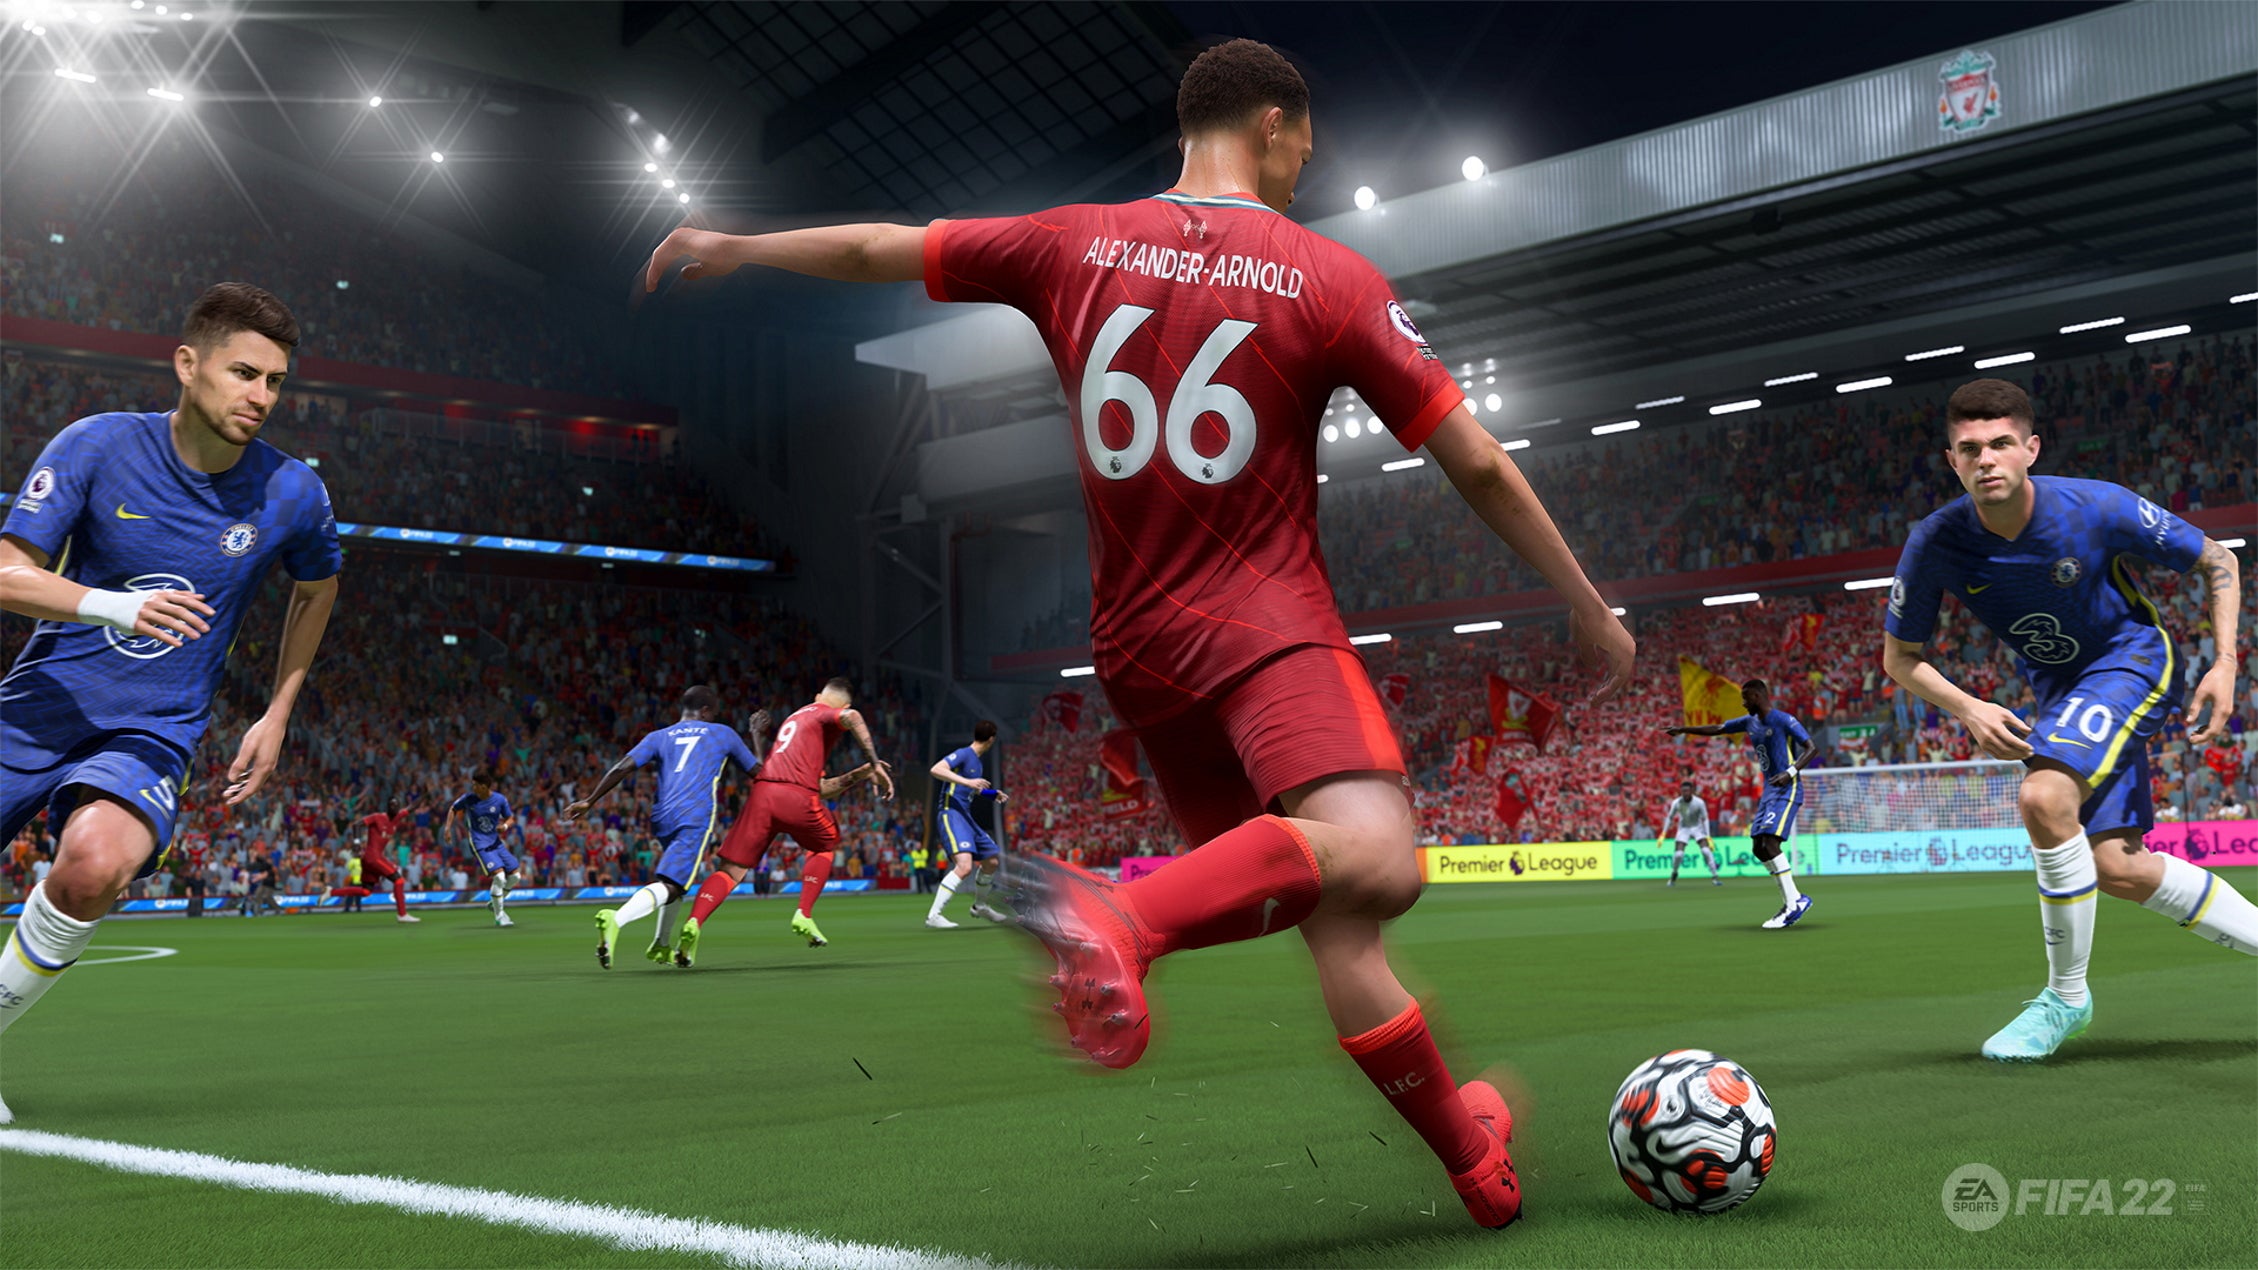 Image for EA reportedly seeking £488m deal with Premier League for post-FIFA football games